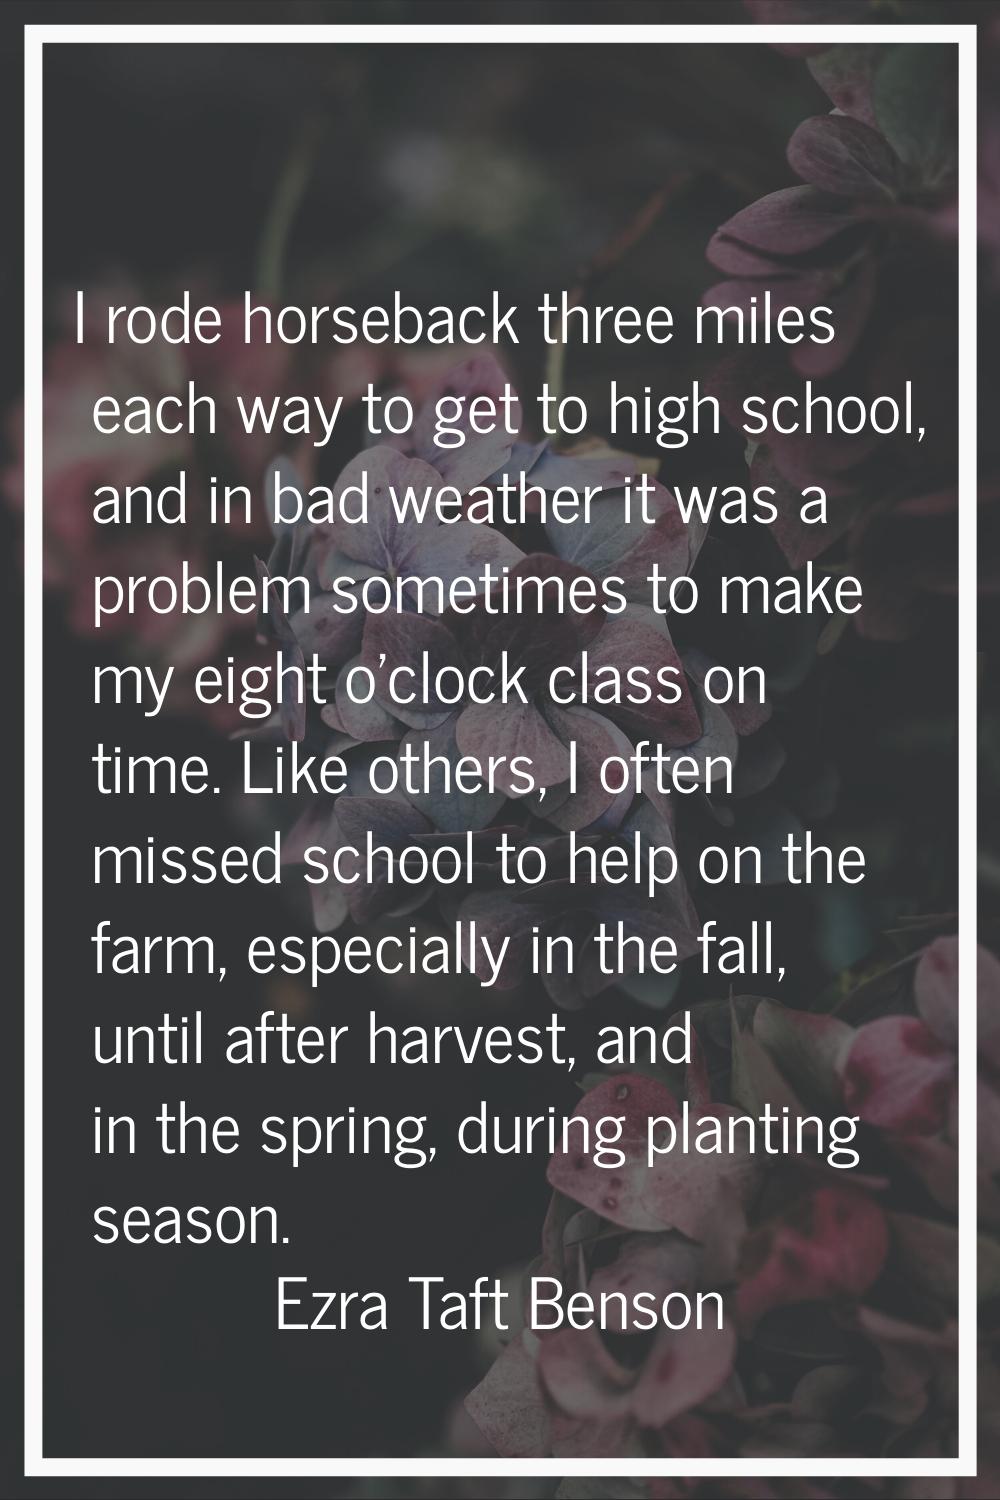 I rode horseback three miles each way to get to high school, and in bad weather it was a problem so